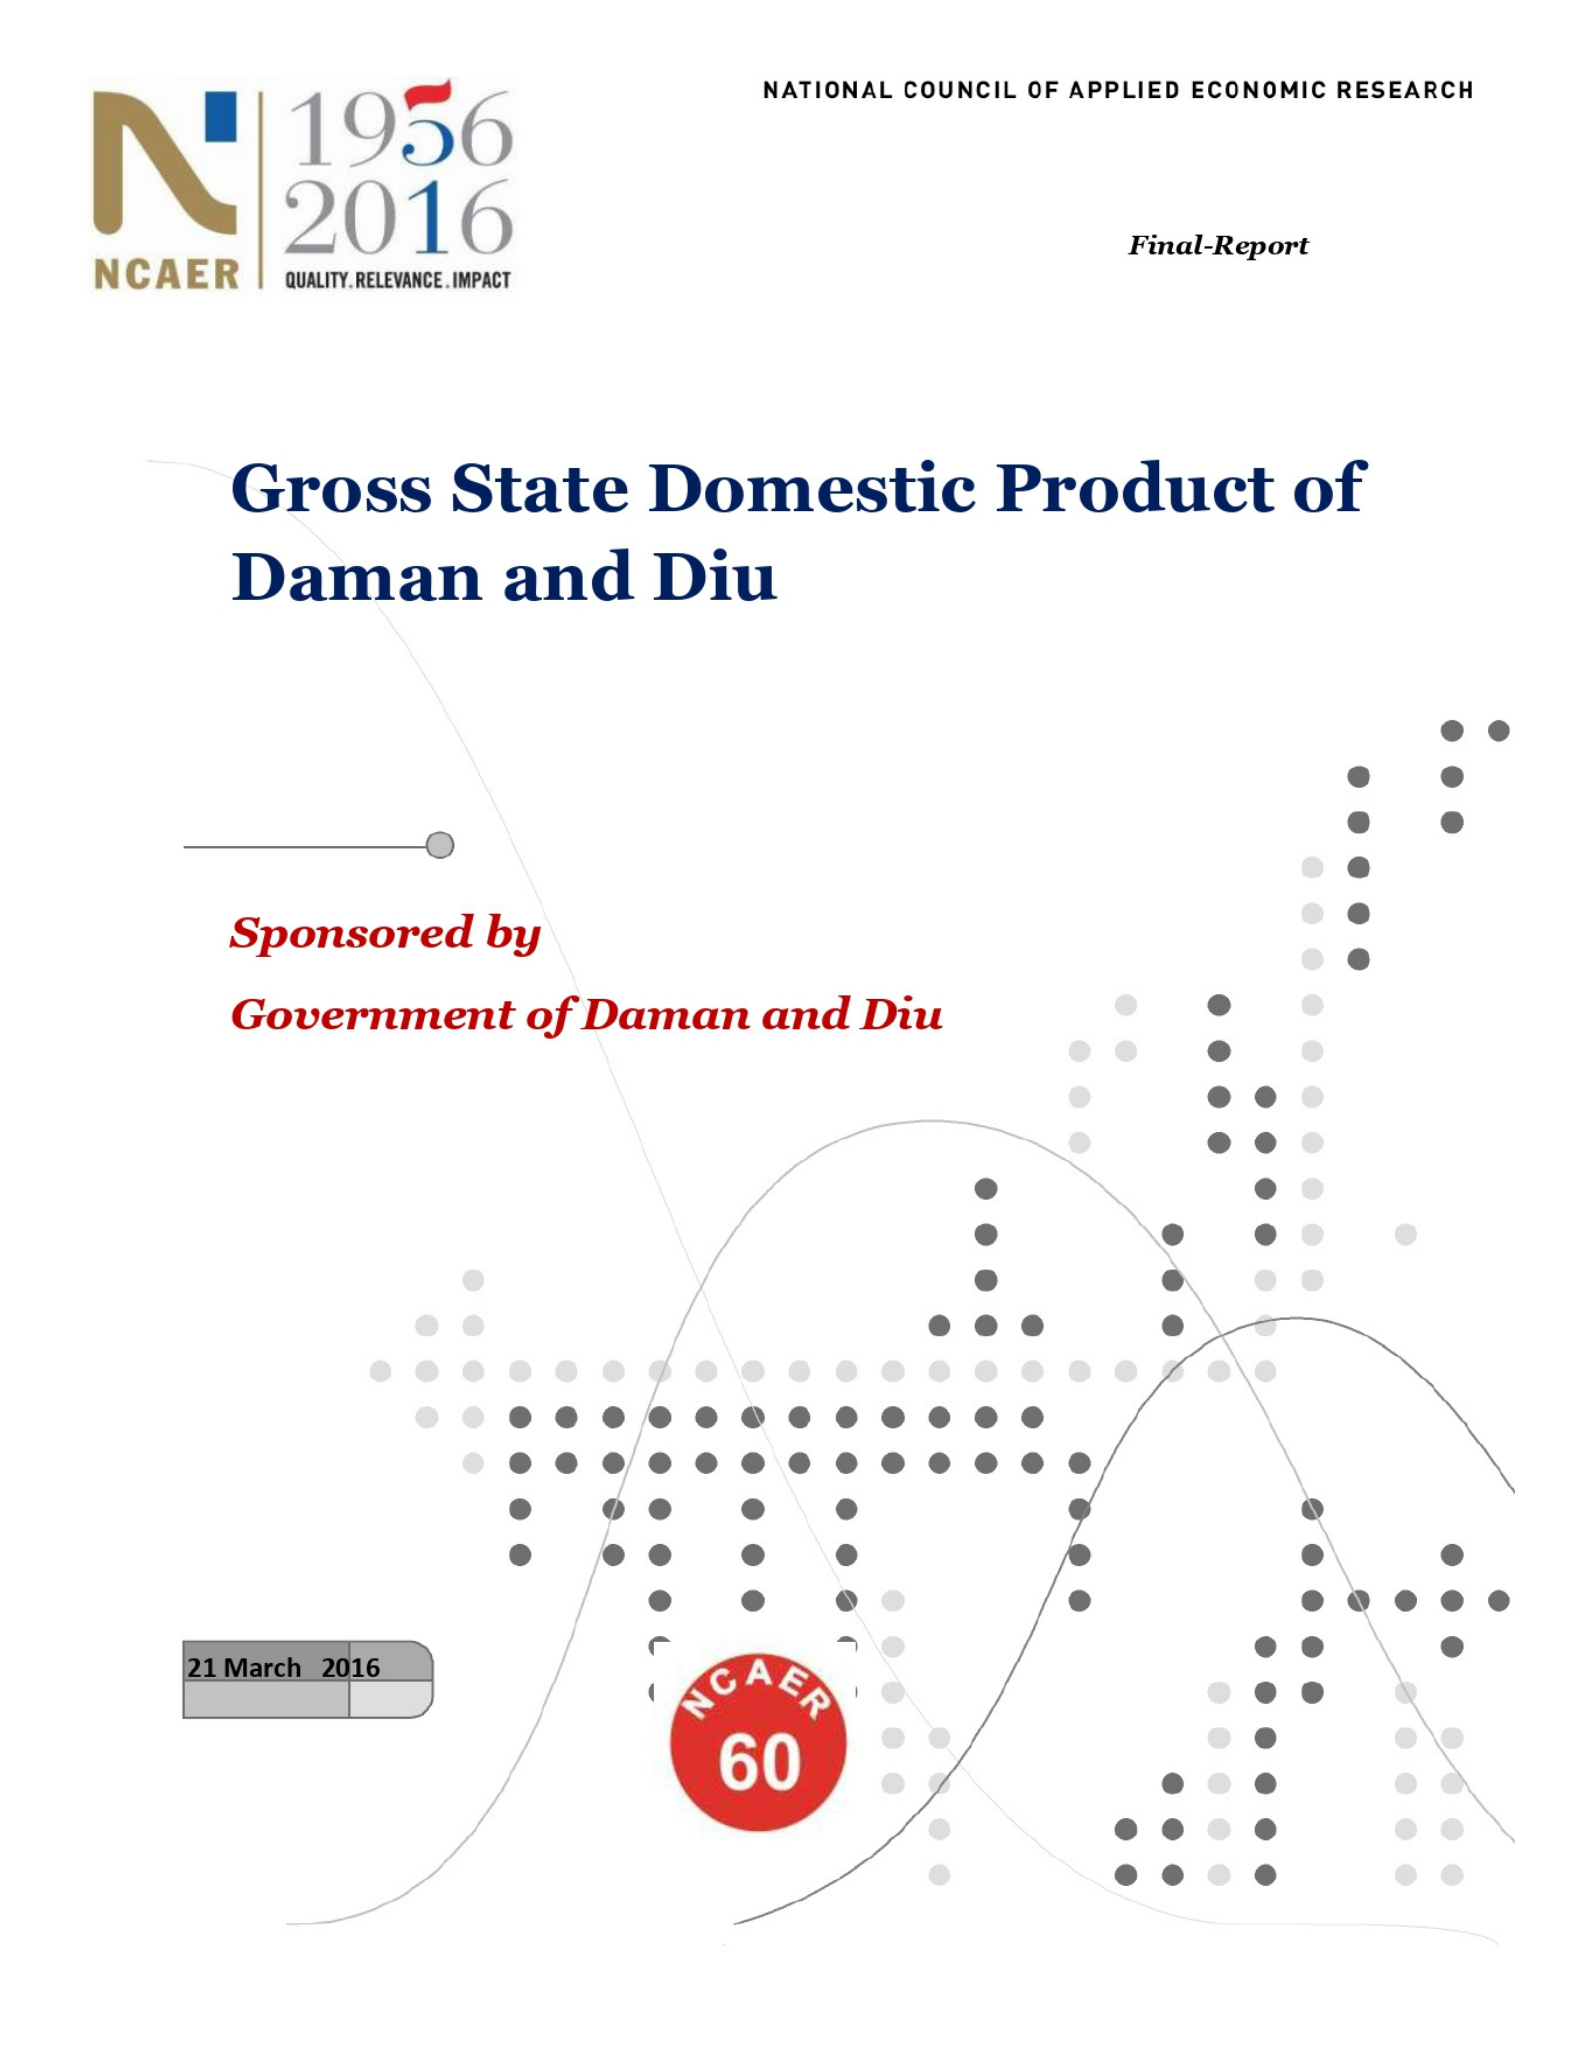 Gross State Domestic Product of Daman and Diu